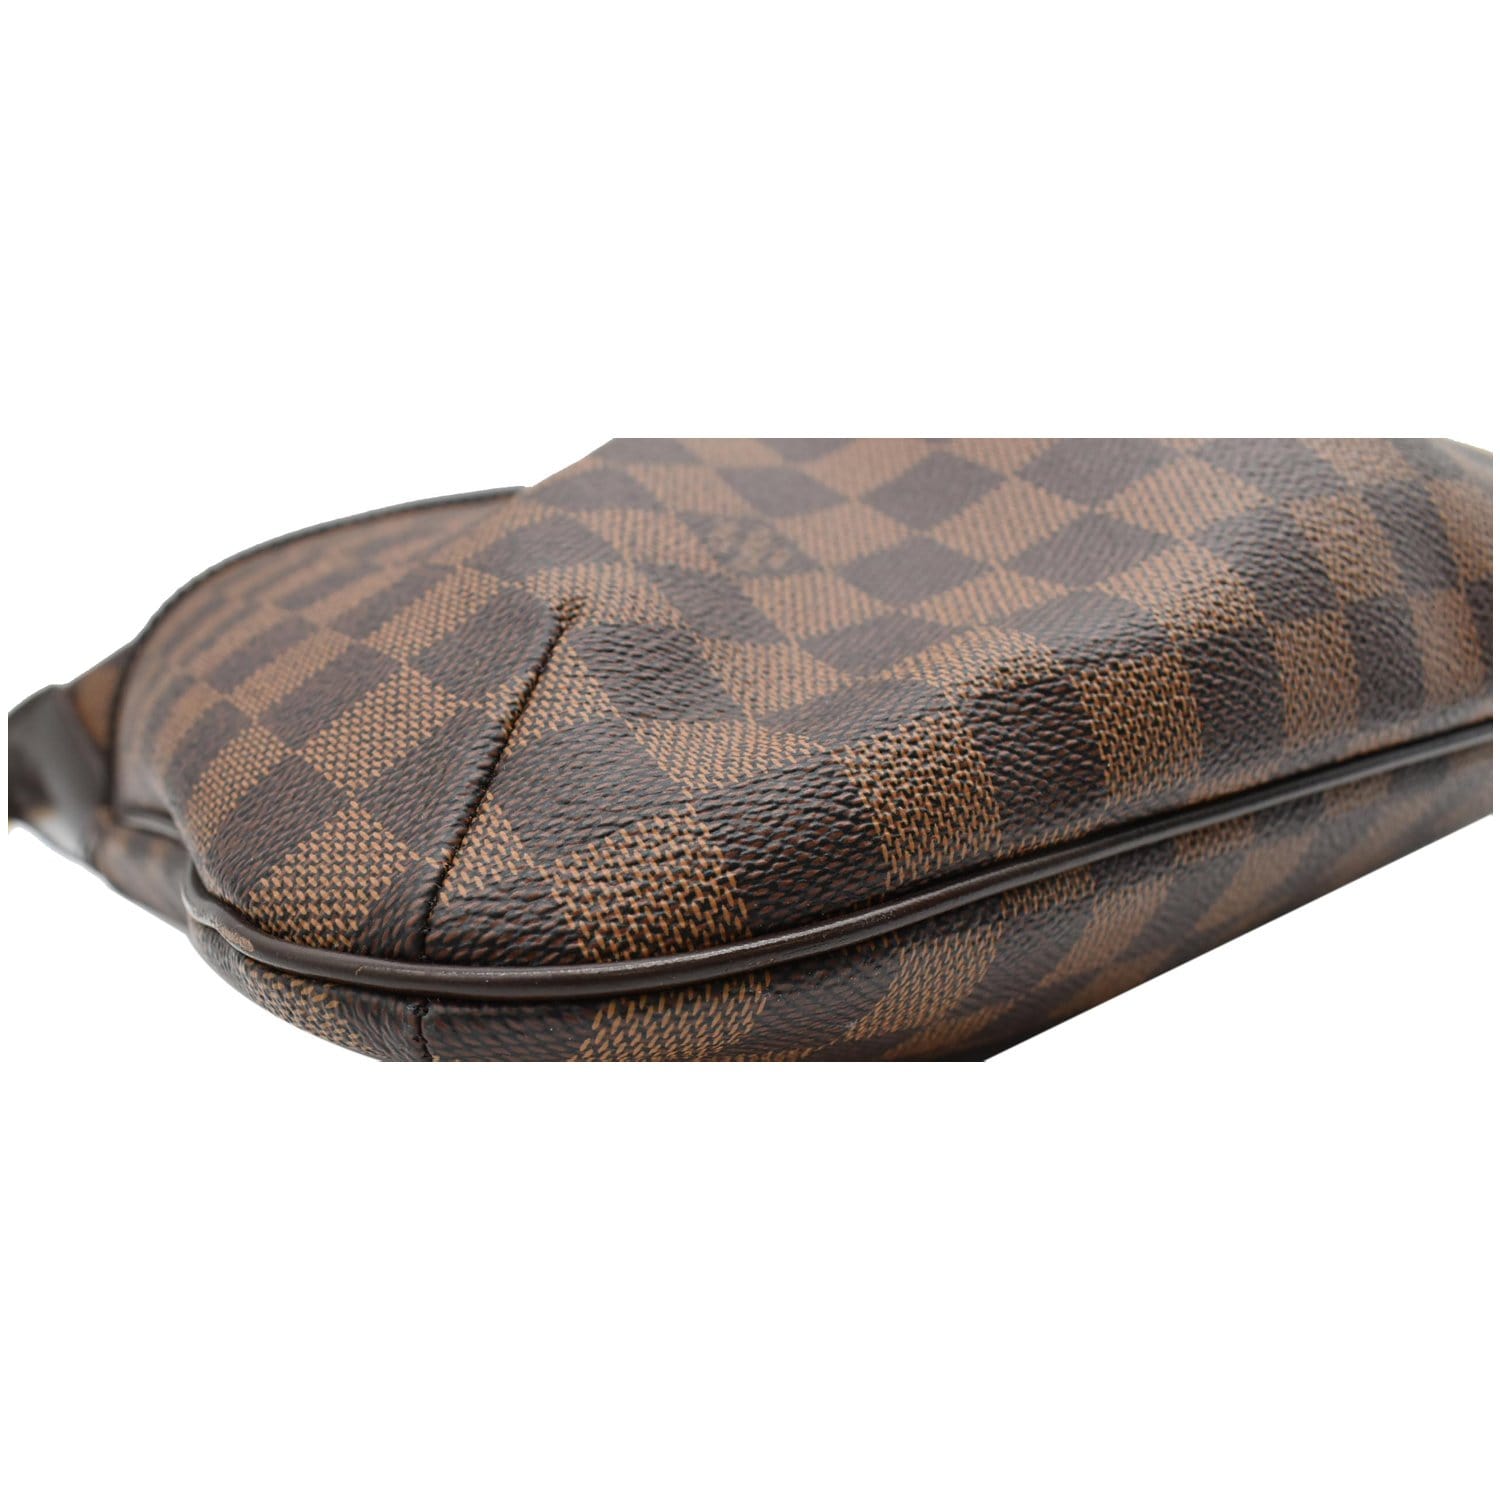 Louis Vuitton appointed the group as Global Ambassadors, Brown Louis  Vuitton Damier Ebene Bloomsbury PM Bag